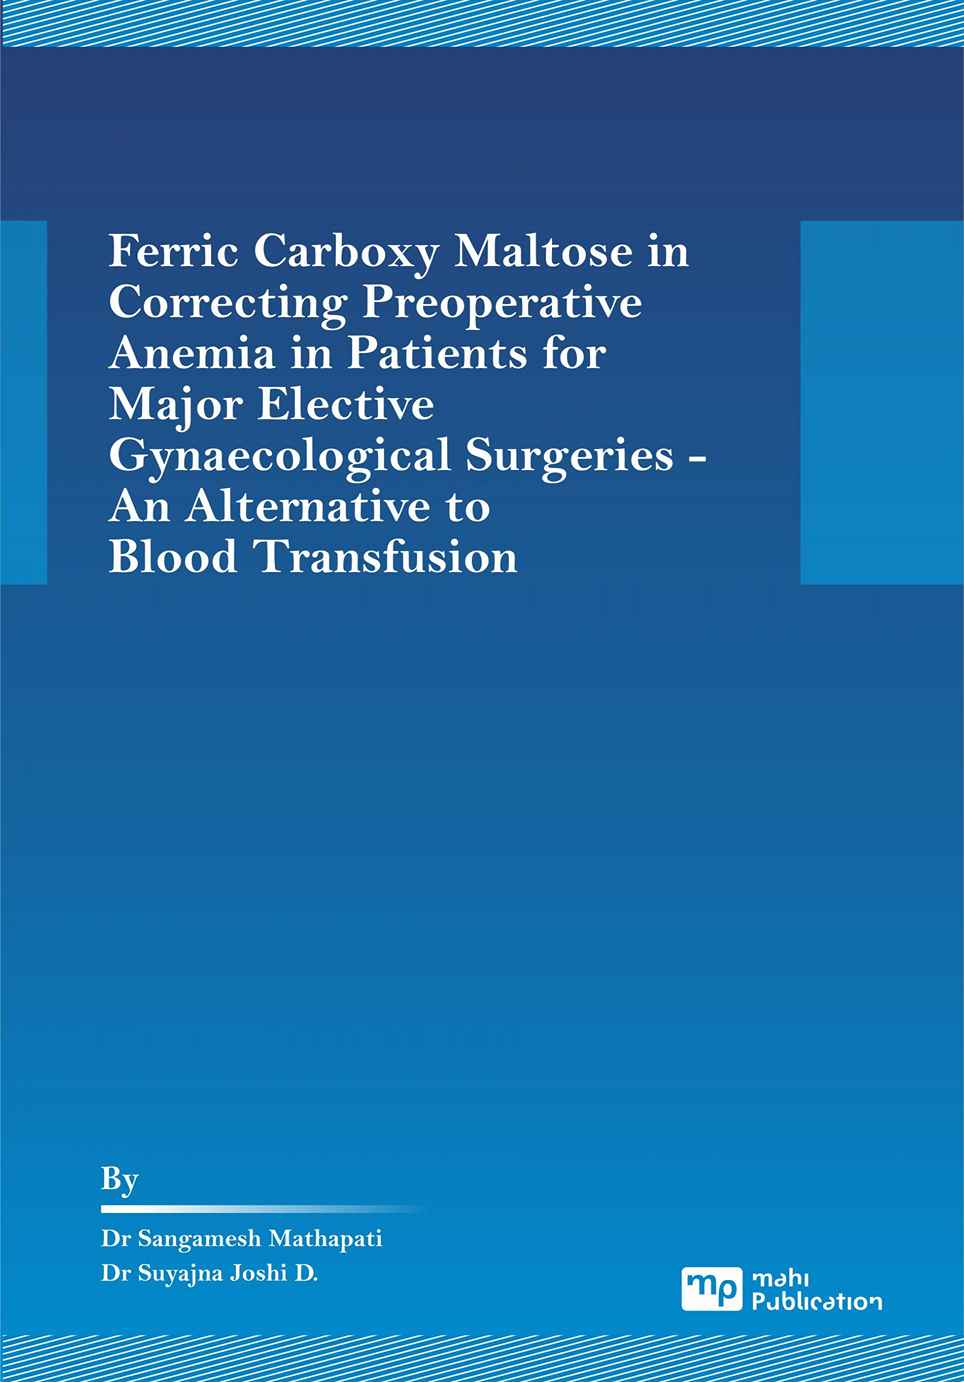 Ferric Carboxy Maltose in Correcting Preoperative Anemia in Patients for Major Elective Gynaecological Surgeries - An Alternative to Blood Transfusion